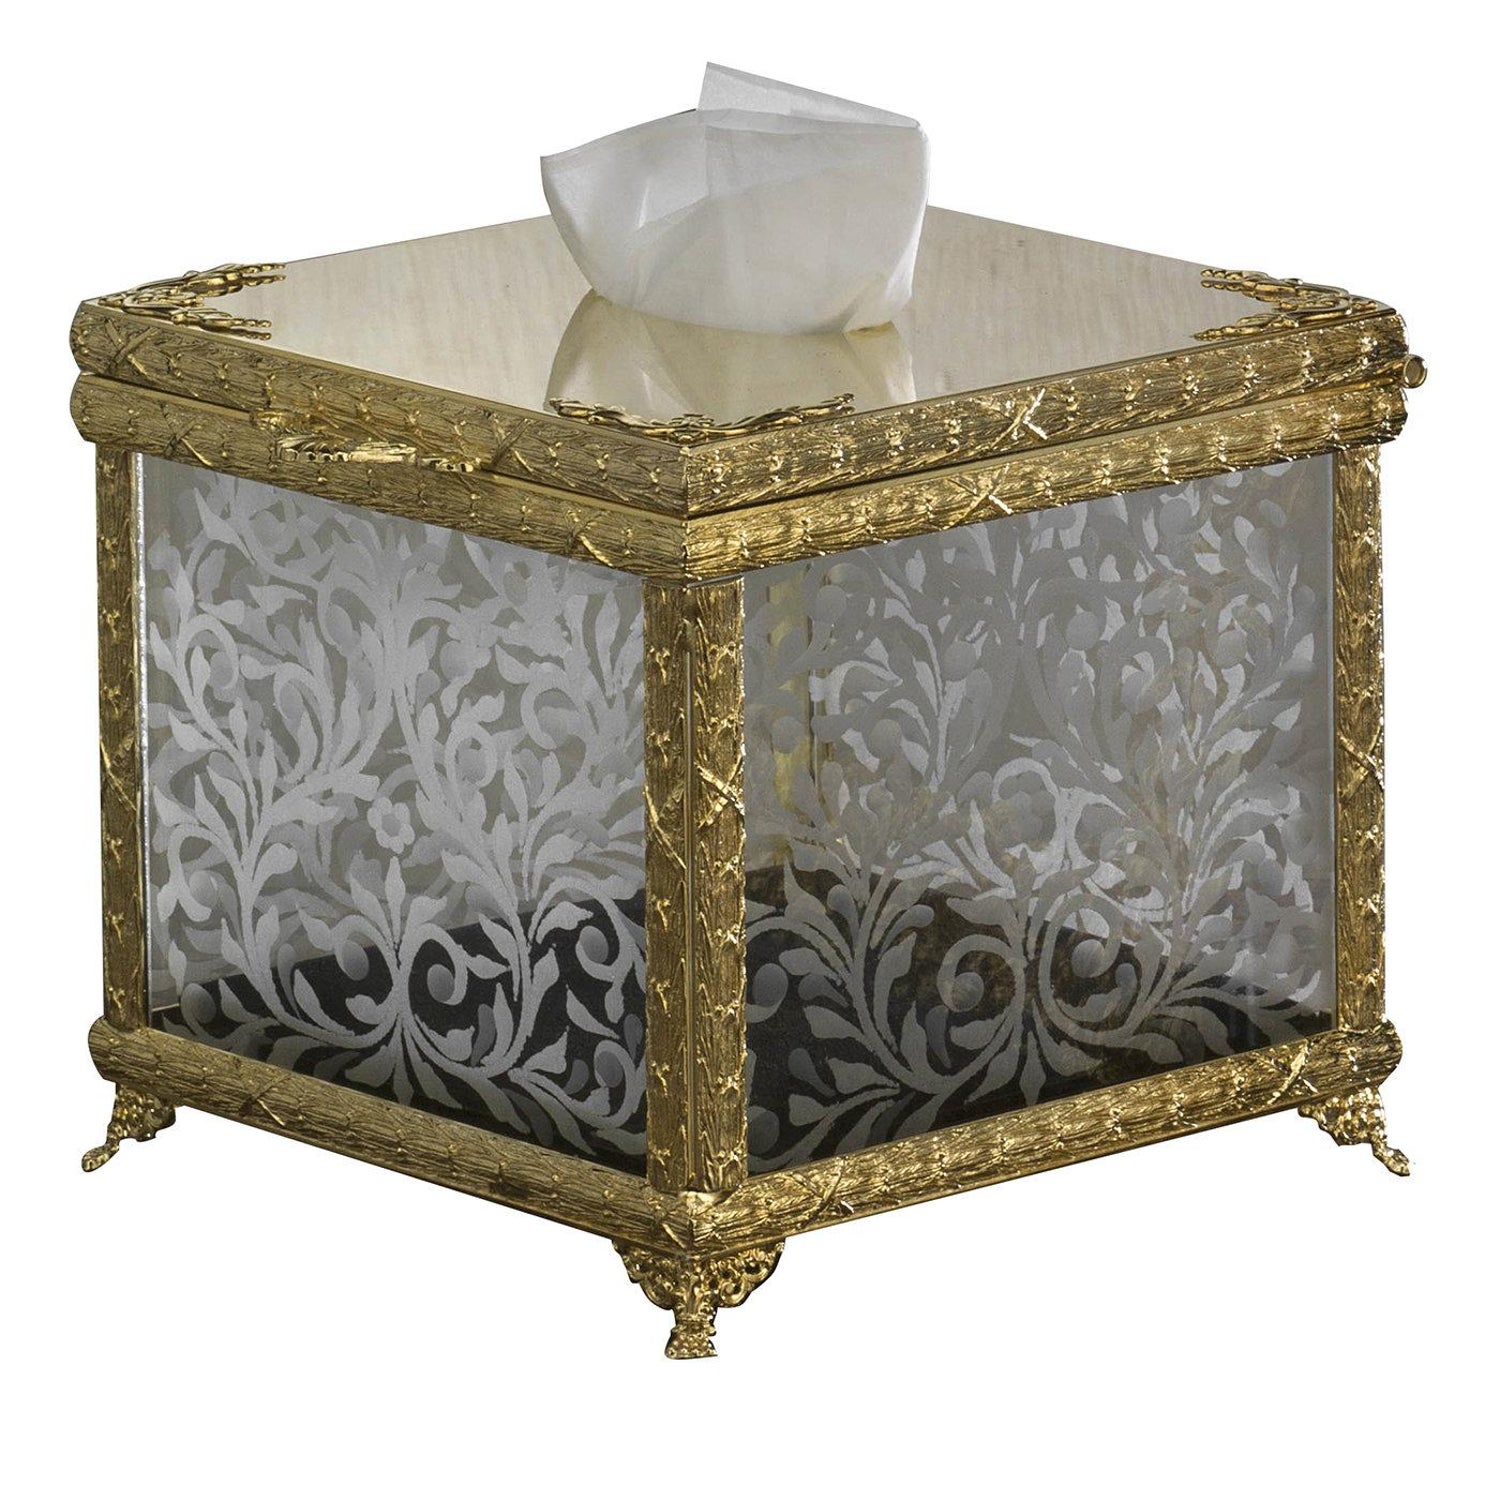 Night Stands Silver Vintage Tissue Box Cover for Bathroom Vanity Countertops Exquisite Acrylic Tissue Box Holder Bedroom Dressers Desks /& Tables